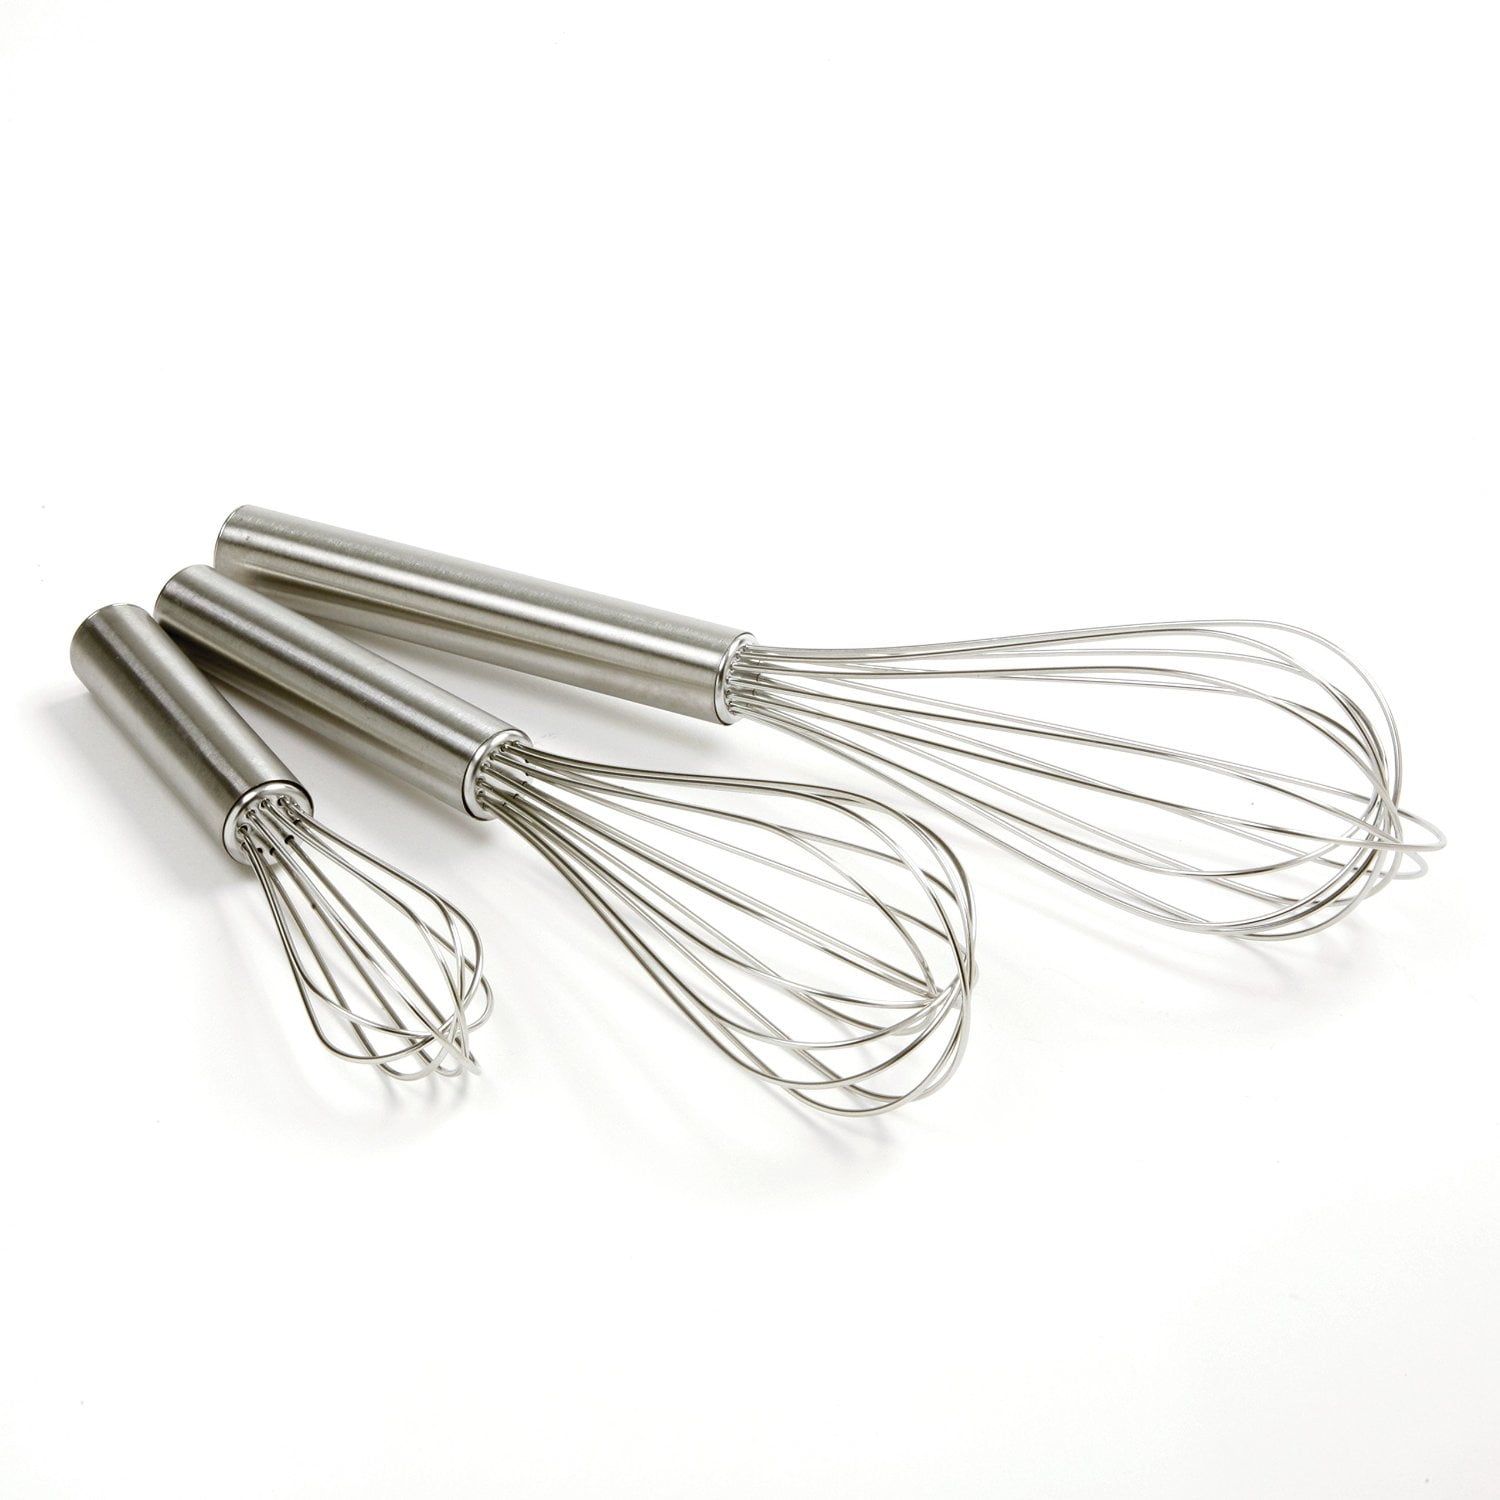 Gray Small Balloon Whisk Mini Whisk 8 Inches +10 Inch +12 Inch Wire Hand Mixer Stainless Steel Egg Mixer 3 Pack Whisks for Cooking 